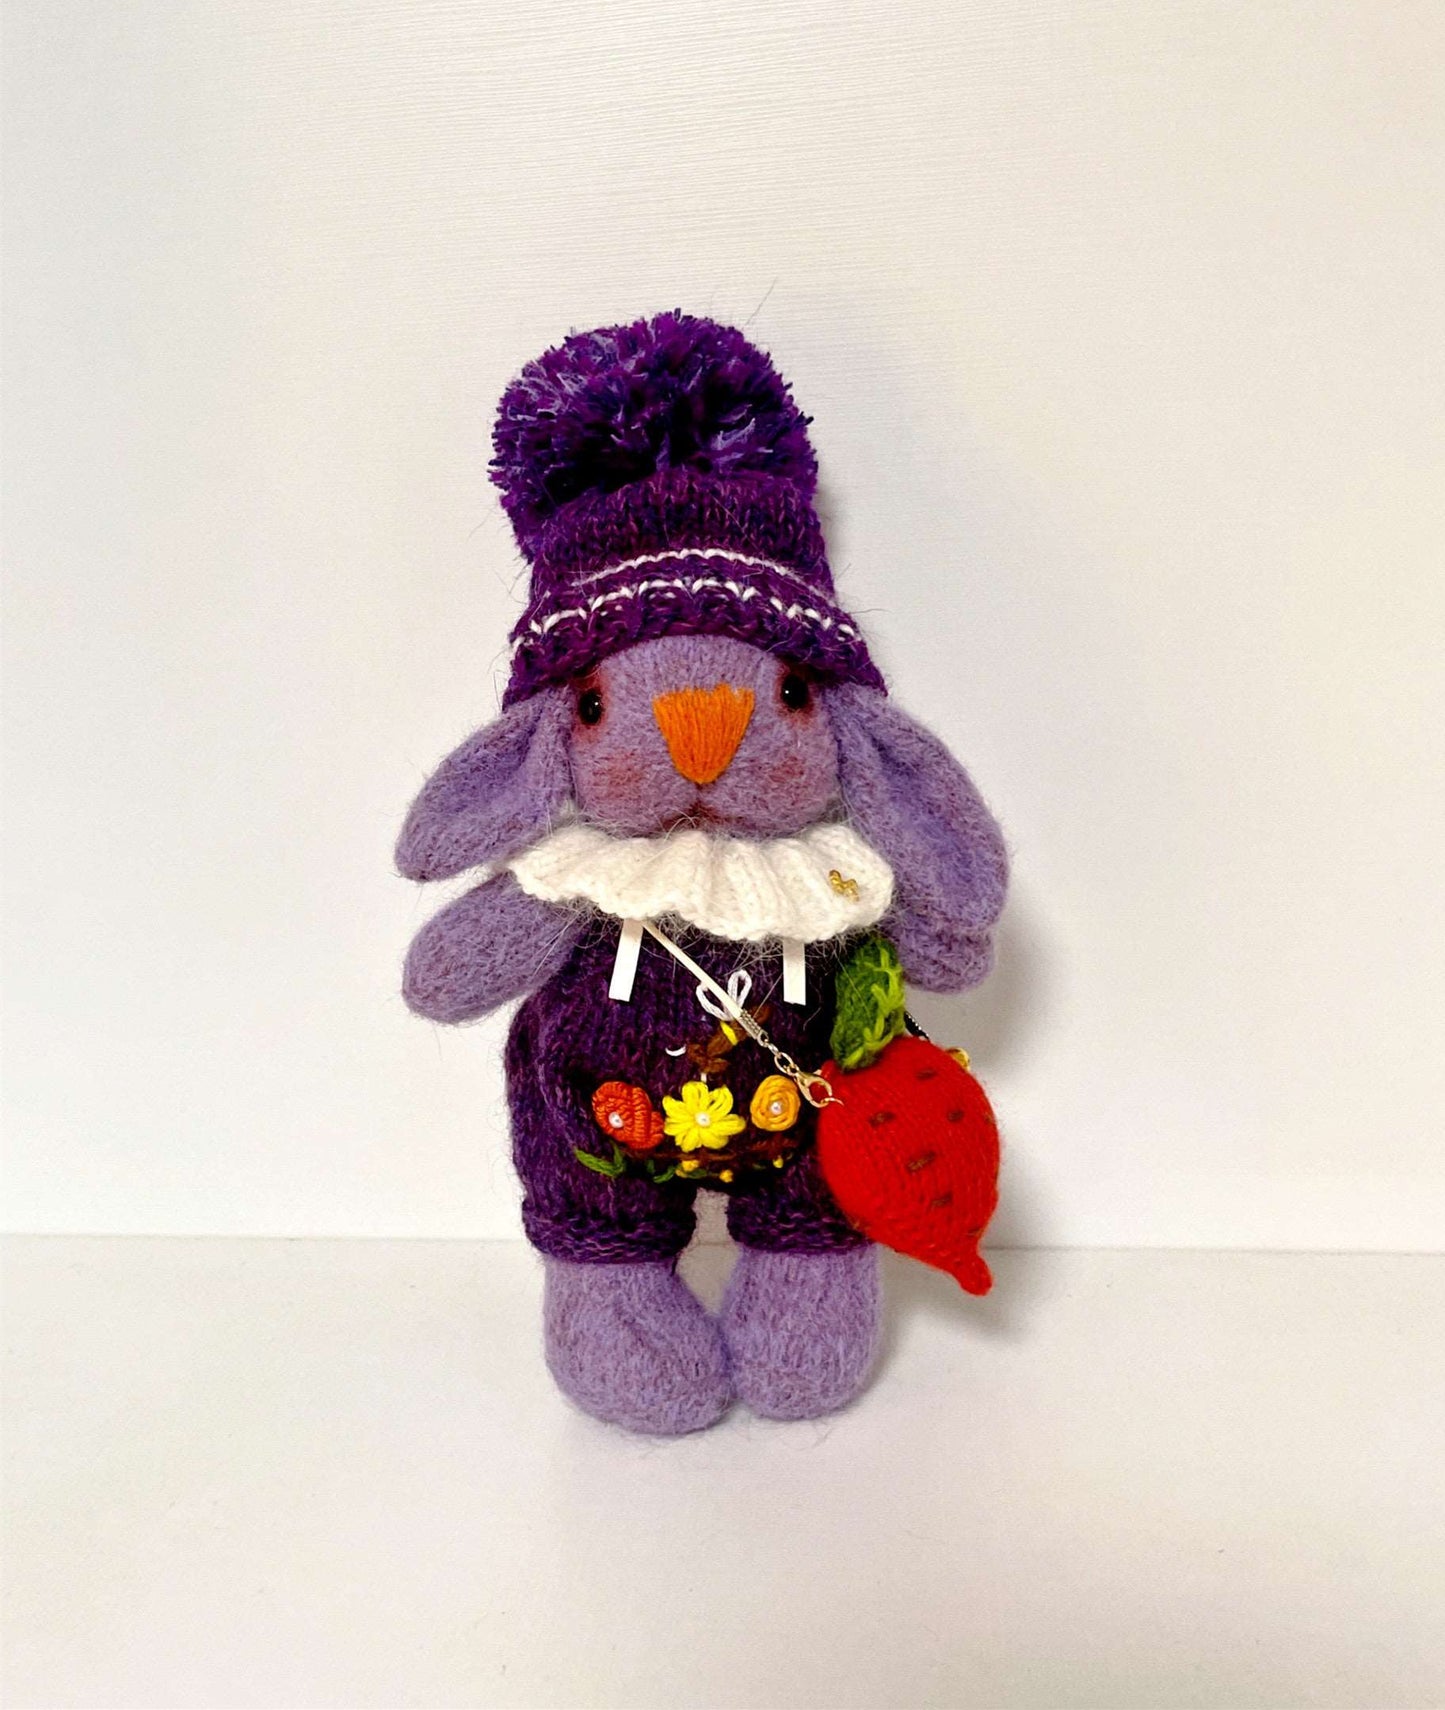 Handmade Crochet Bunny Toy for Gifts